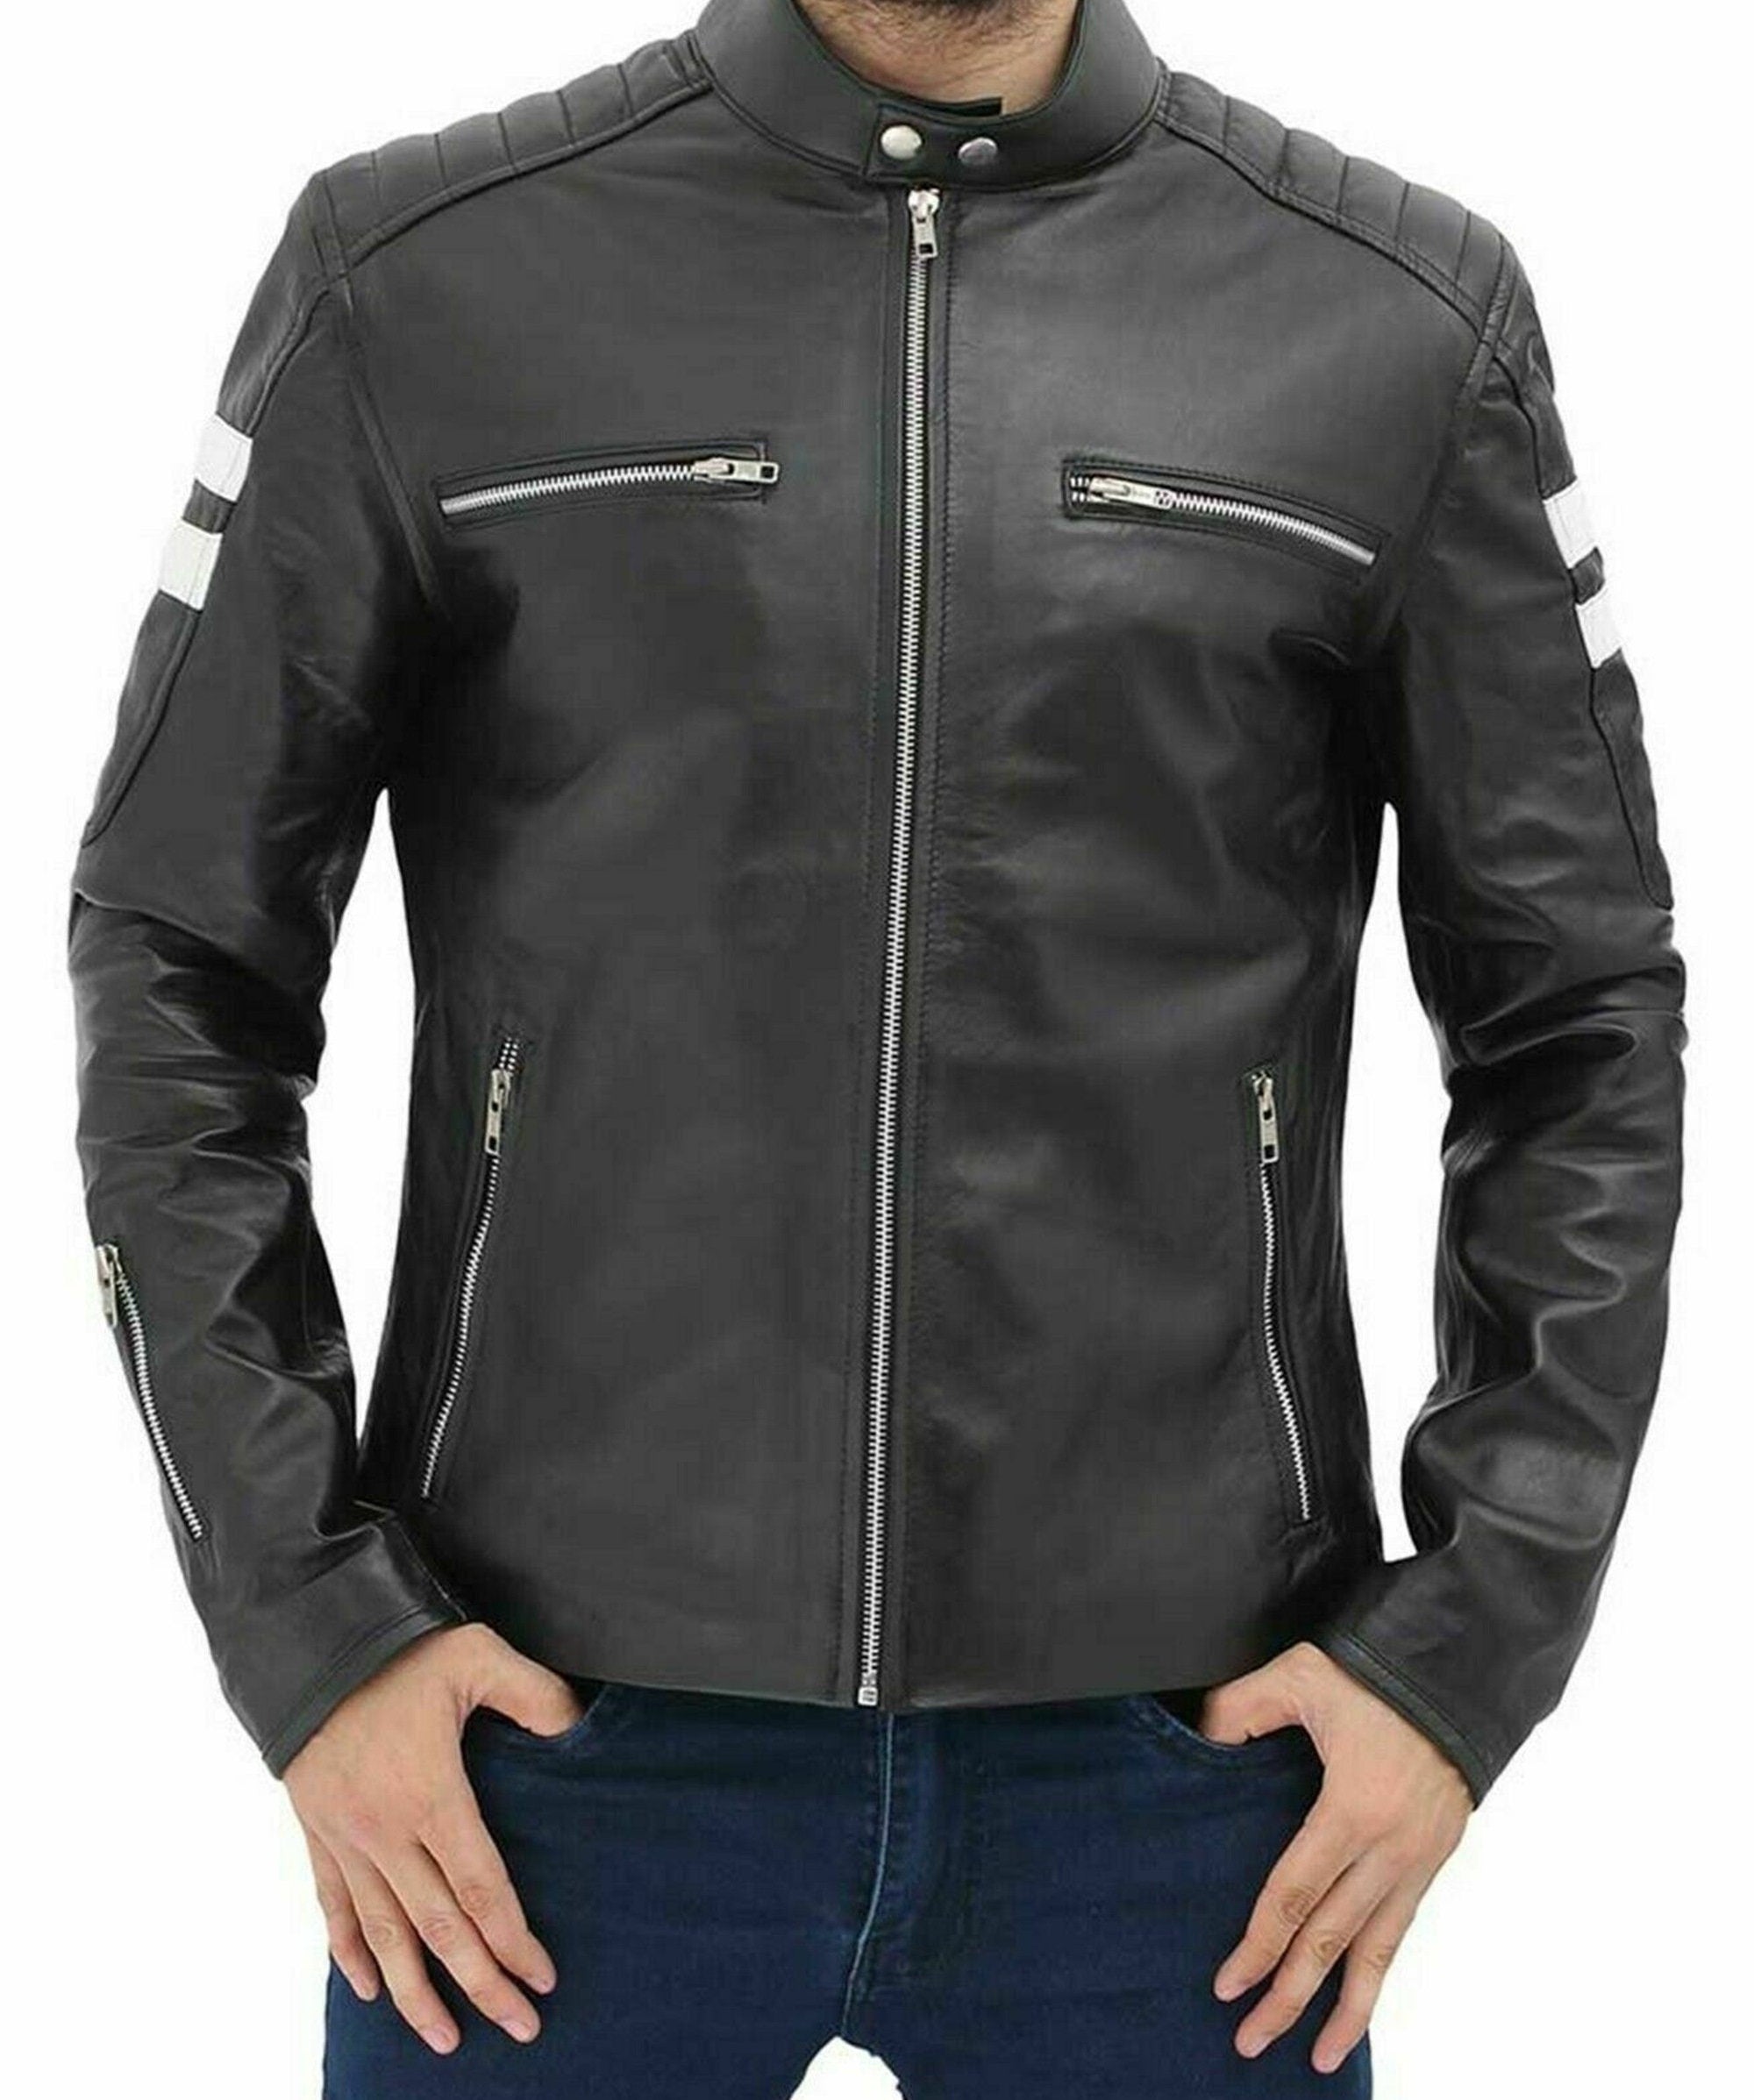 Mens White And Black Stripes Leather Jacket